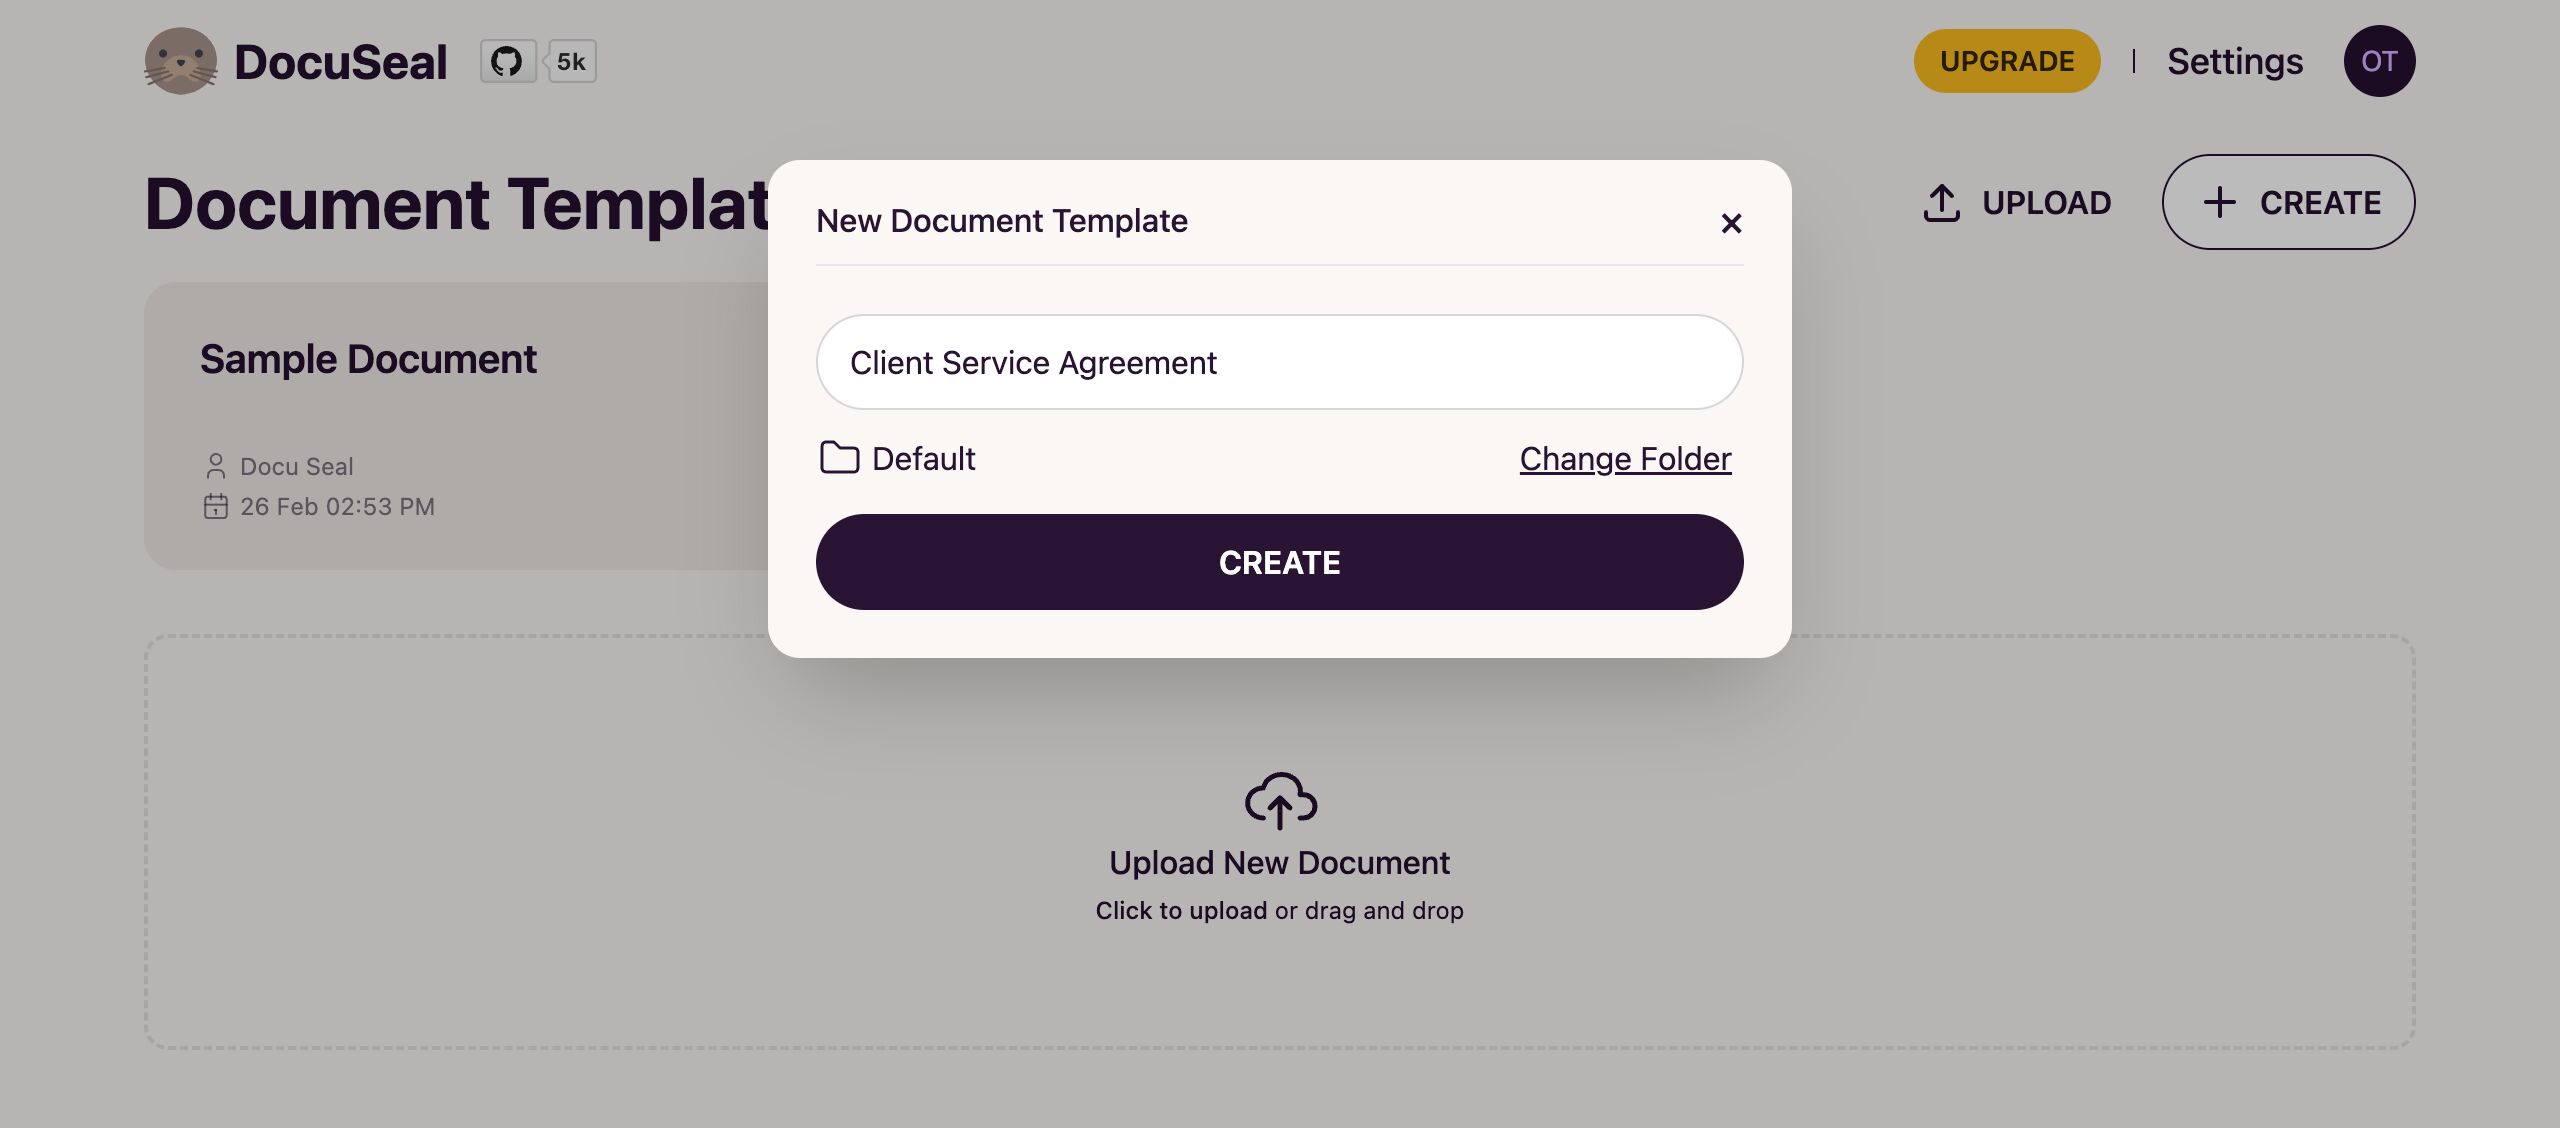 New Document Template Modal